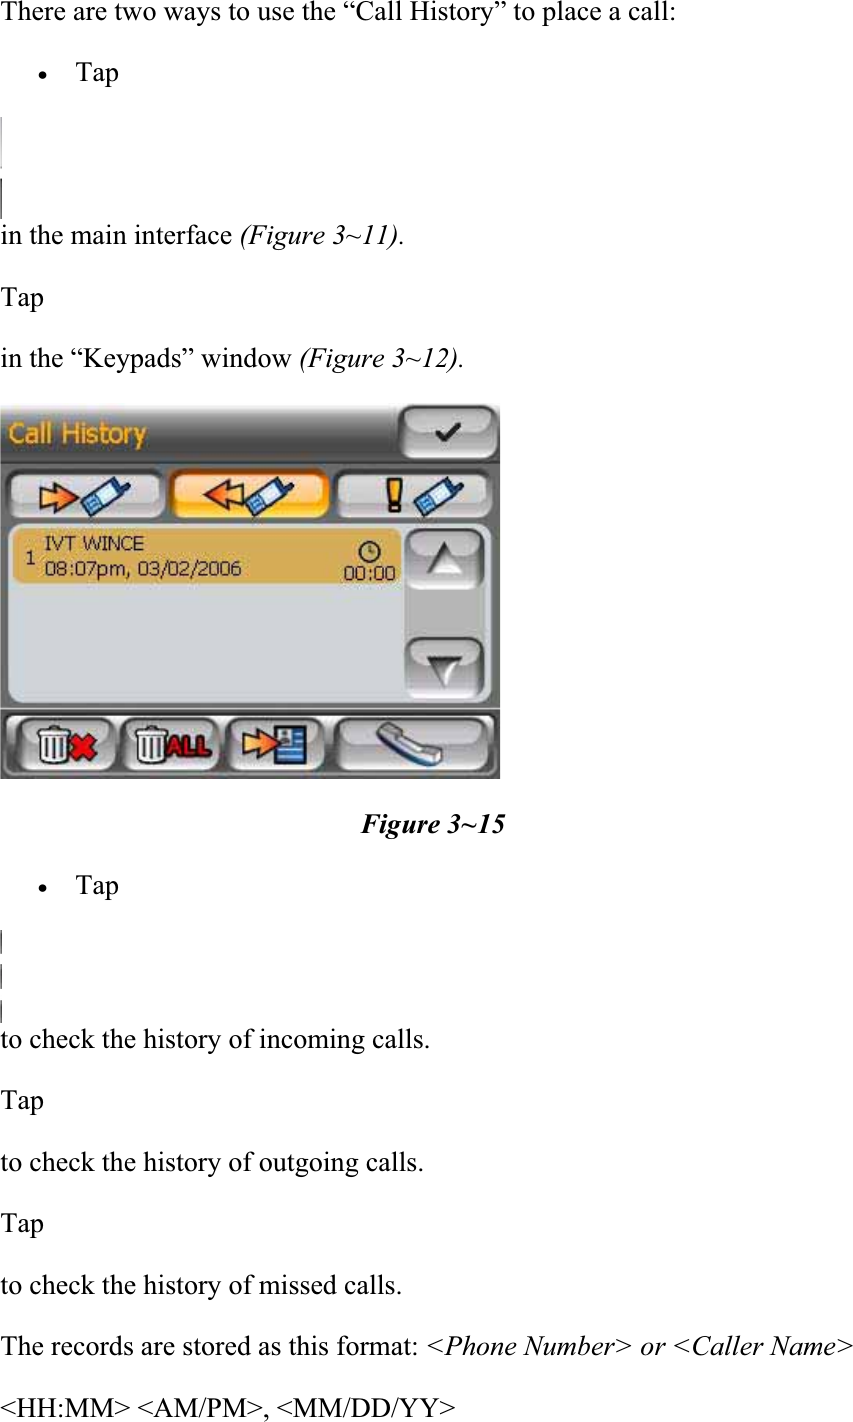 There are two ways to use the “Call History” to place a call:  xTapin the main interface (Figure 3~11). Tapin the “Keypads” window (Figure 3~12). Figure 3~15 xTapto check the history of incoming calls.  Tapto check the history of outgoing calls.  Tapto check the history of missed calls.  The records are stored as this format: &lt;Phone Number&gt; or &lt;Caller Name&gt; &lt;HH:MM&gt; &lt;AM/PM&gt;, &lt;MM/DD/YY&gt;  